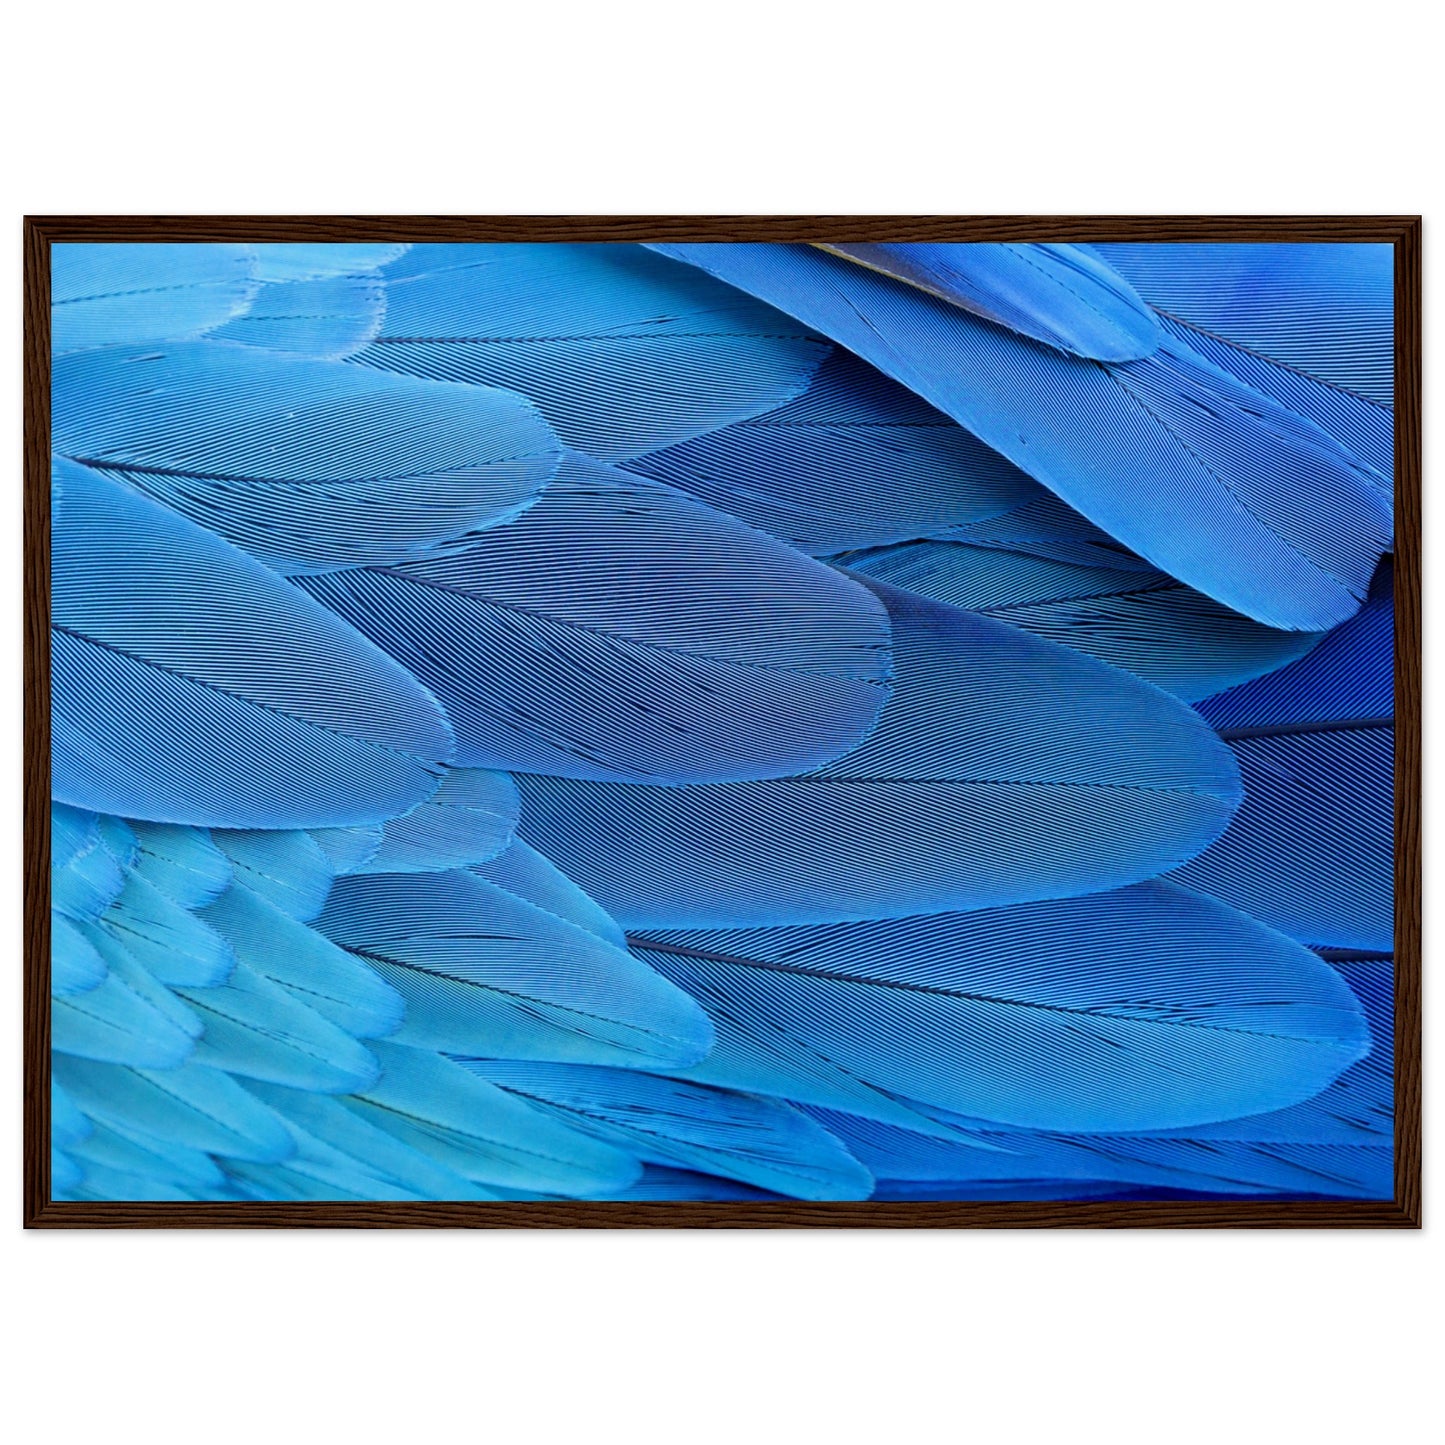 Blue Macaw Wing Feathers